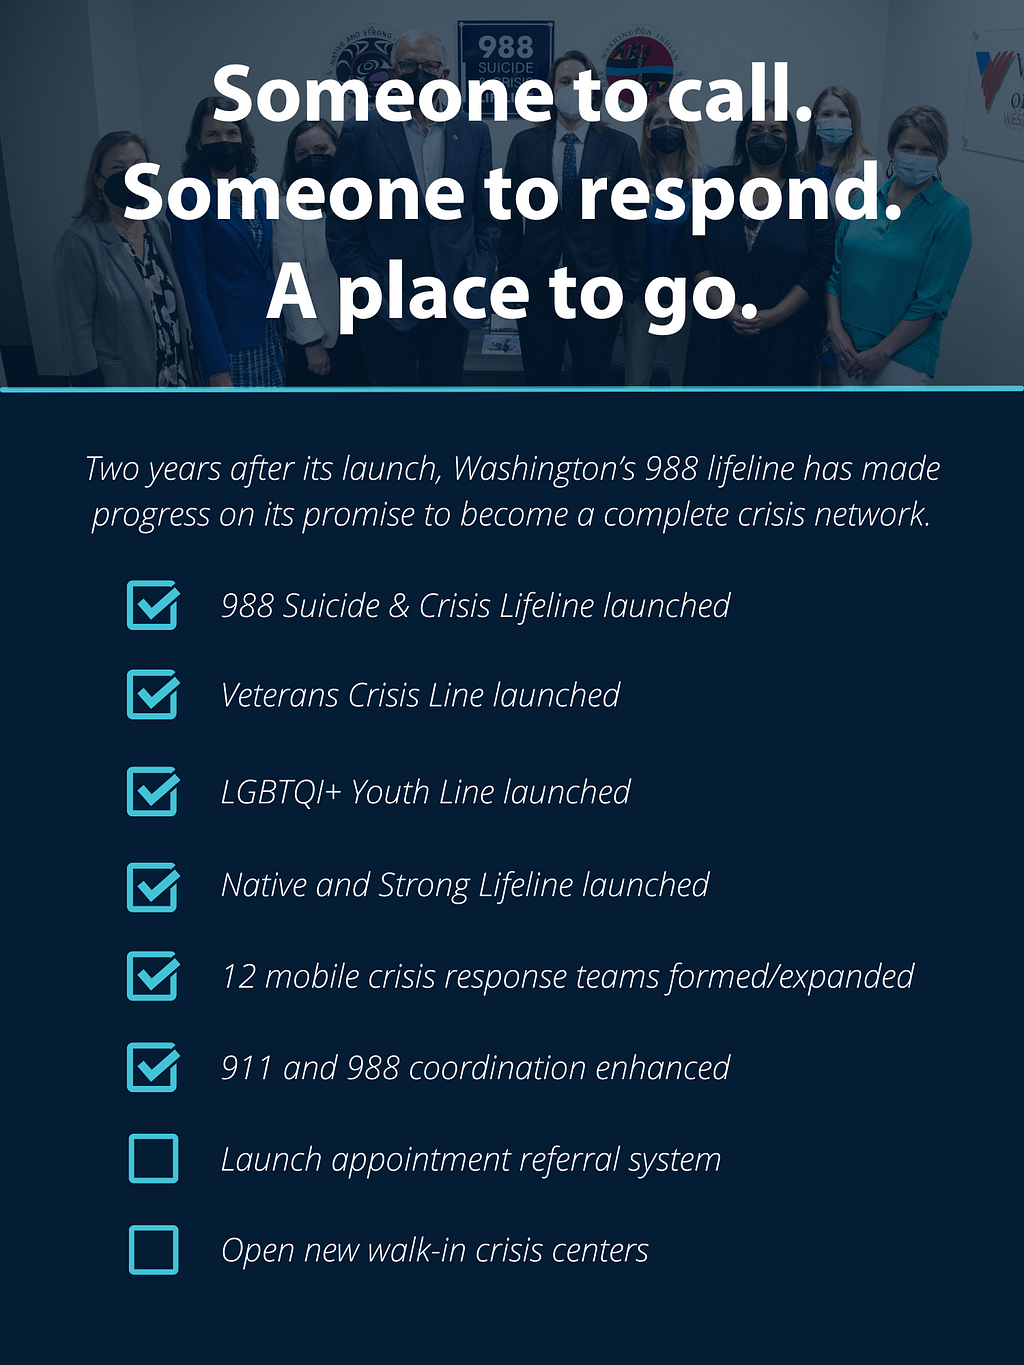 A checklist of progress Washington state has made towards making 988 “someone to call, someone to respond, and a place to go.”